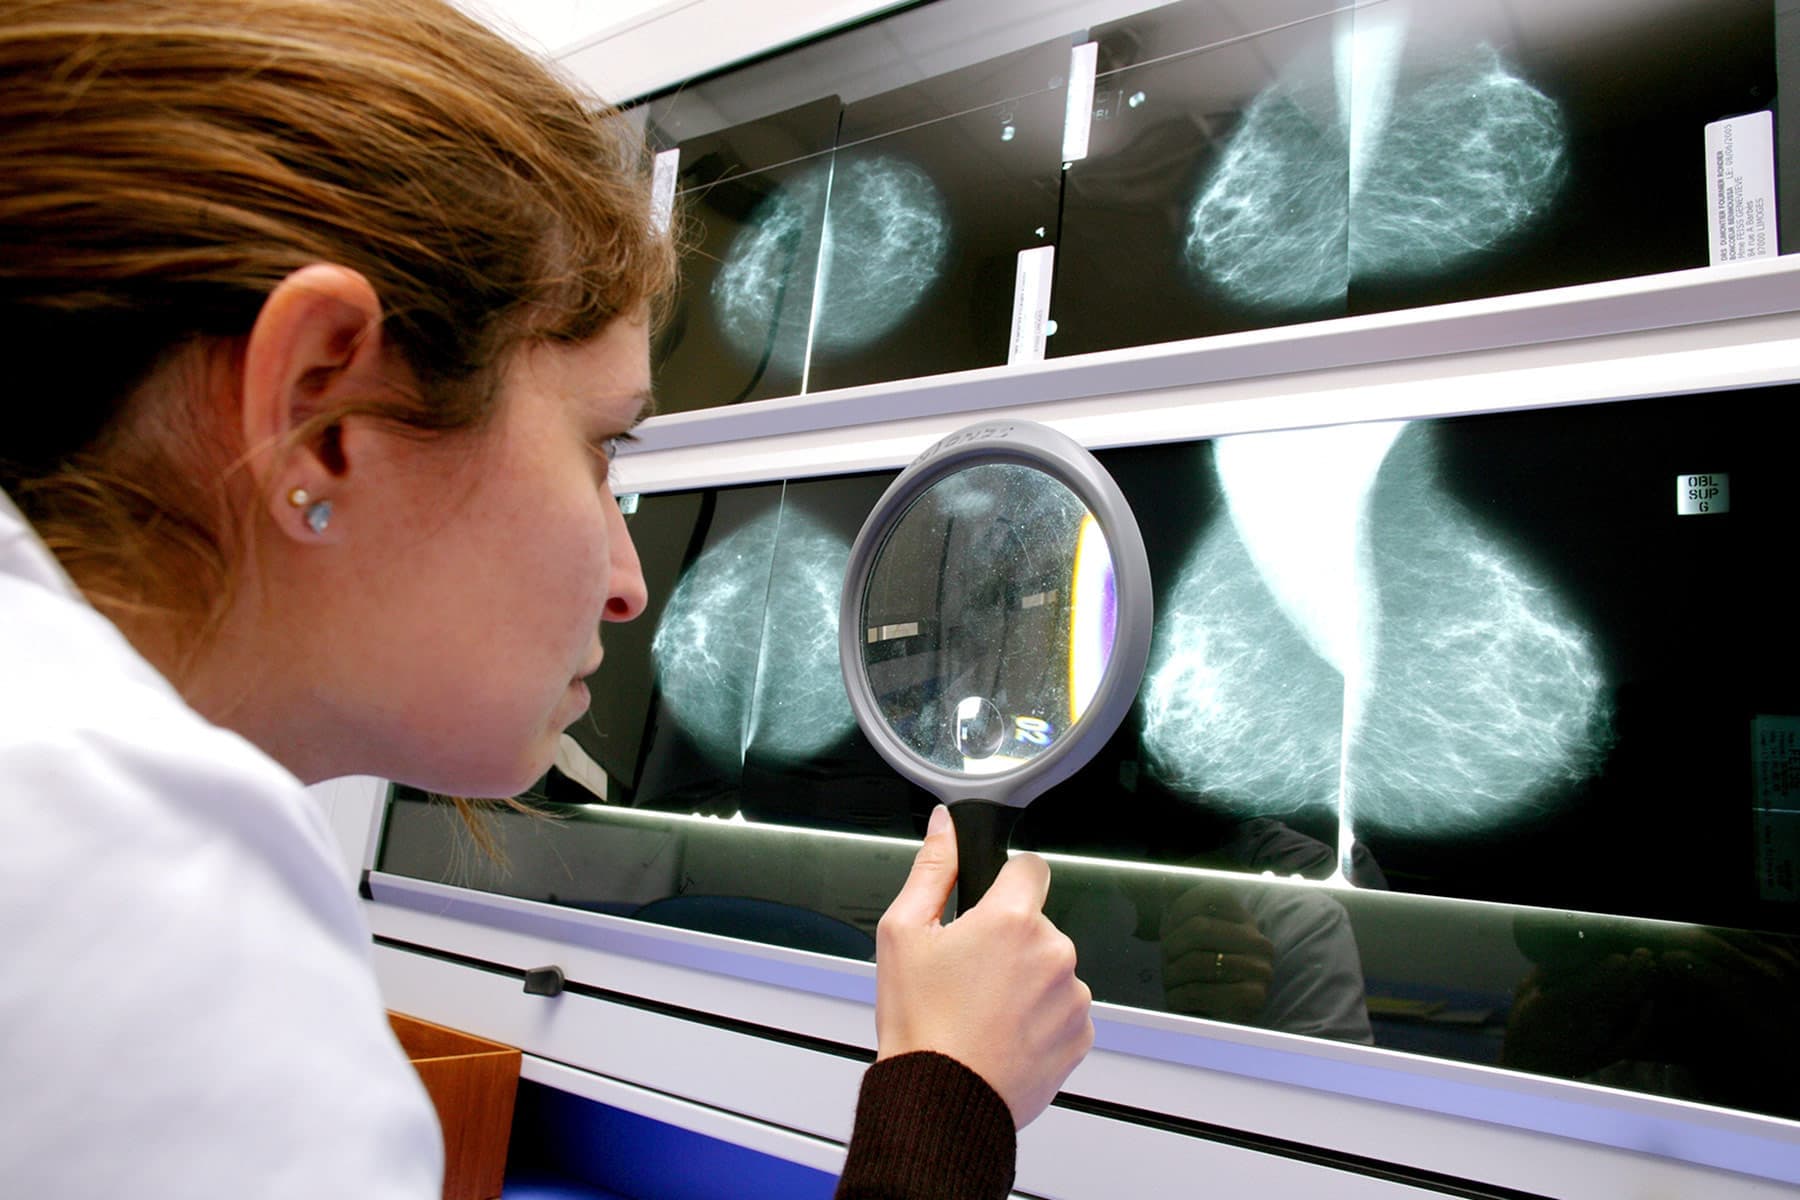 Common Chemicals: Breast Cancer Link?